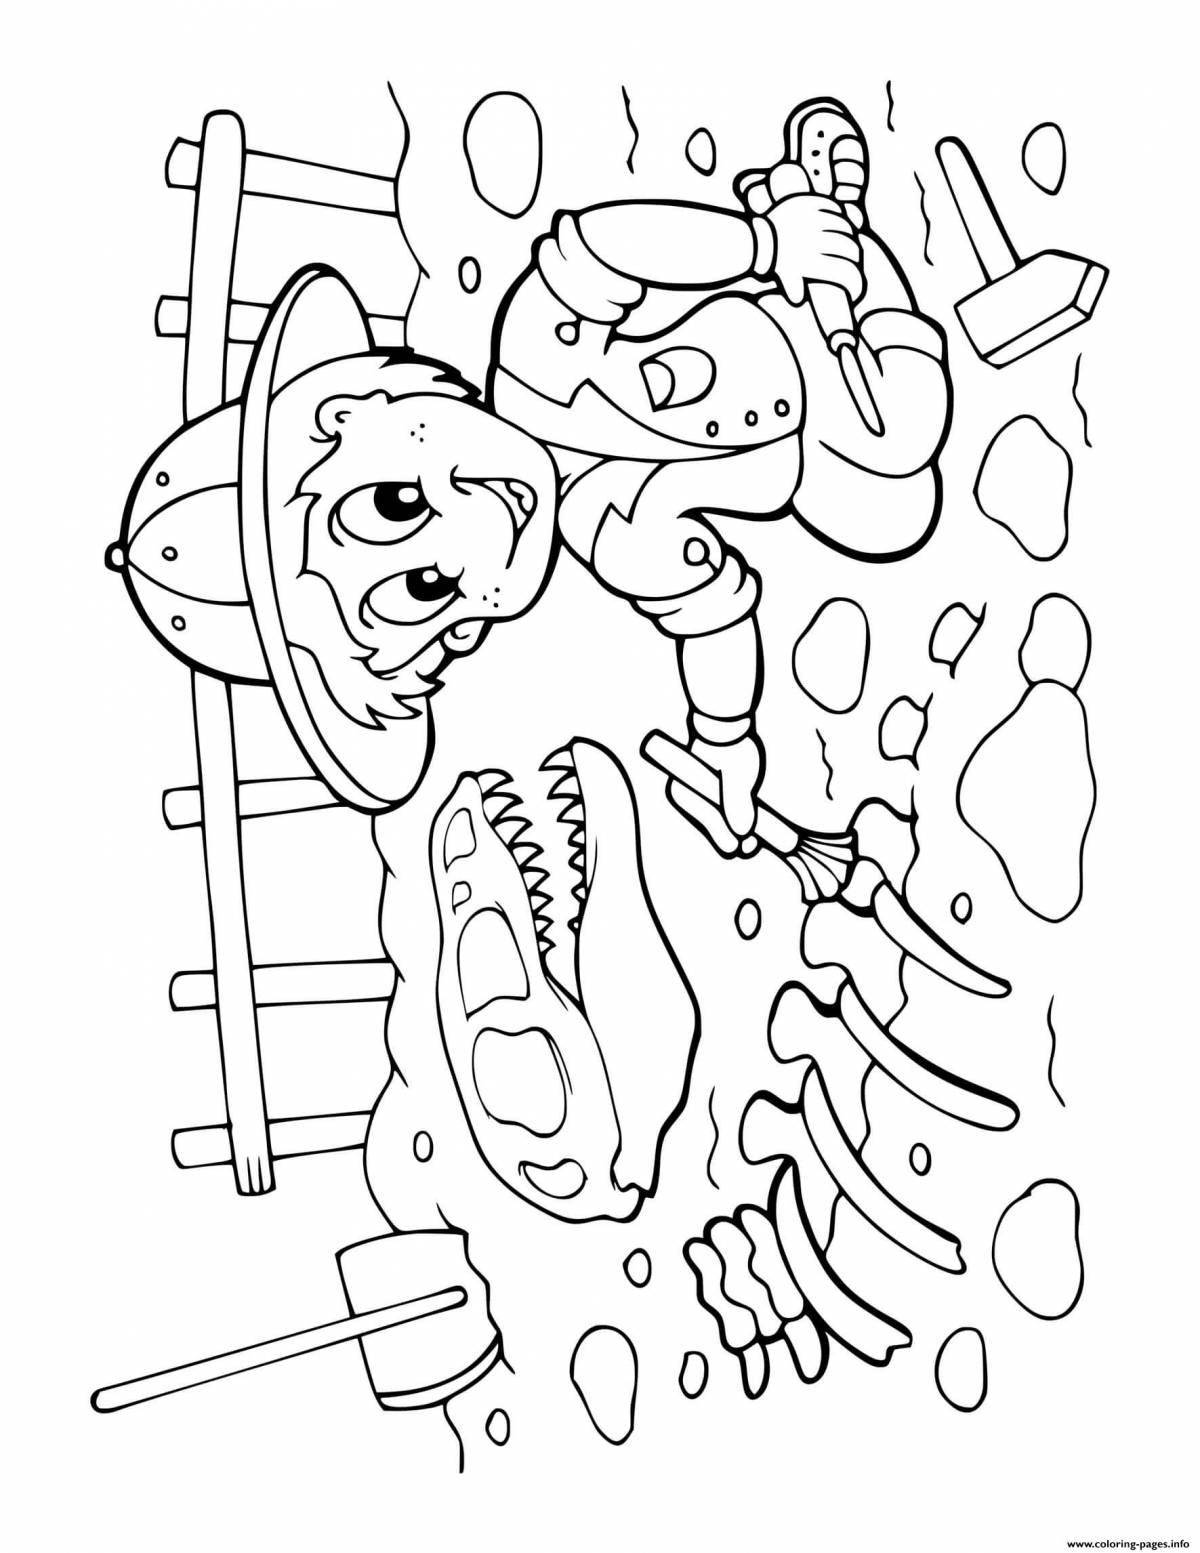 Colorful archaeologist coloring page